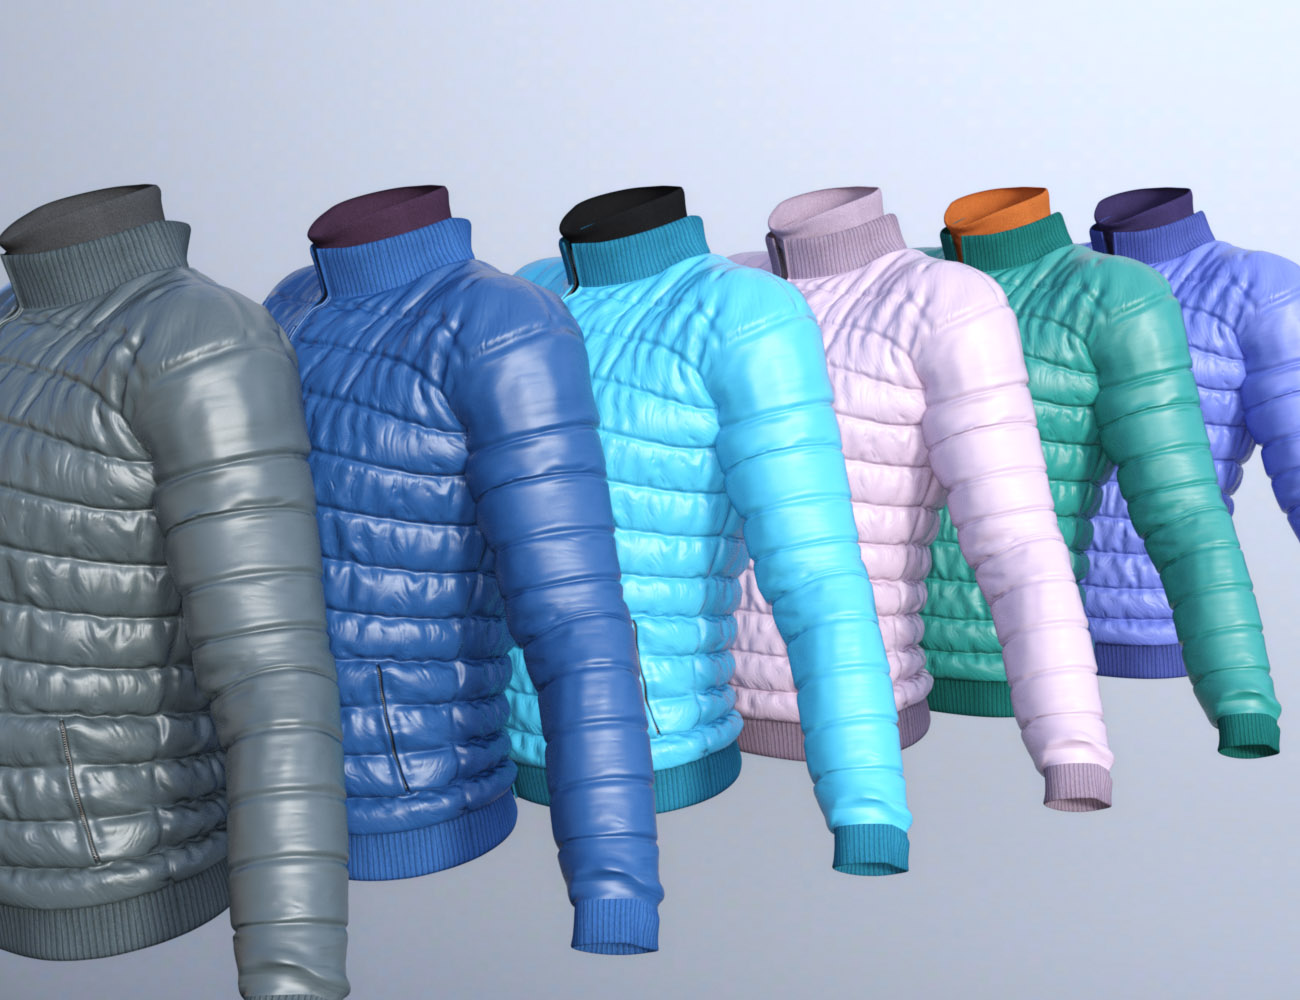 Autumn Jackets for Genesis 3 Male(s) and Female(s) by: Oskarsson, 3D Models by Daz 3D